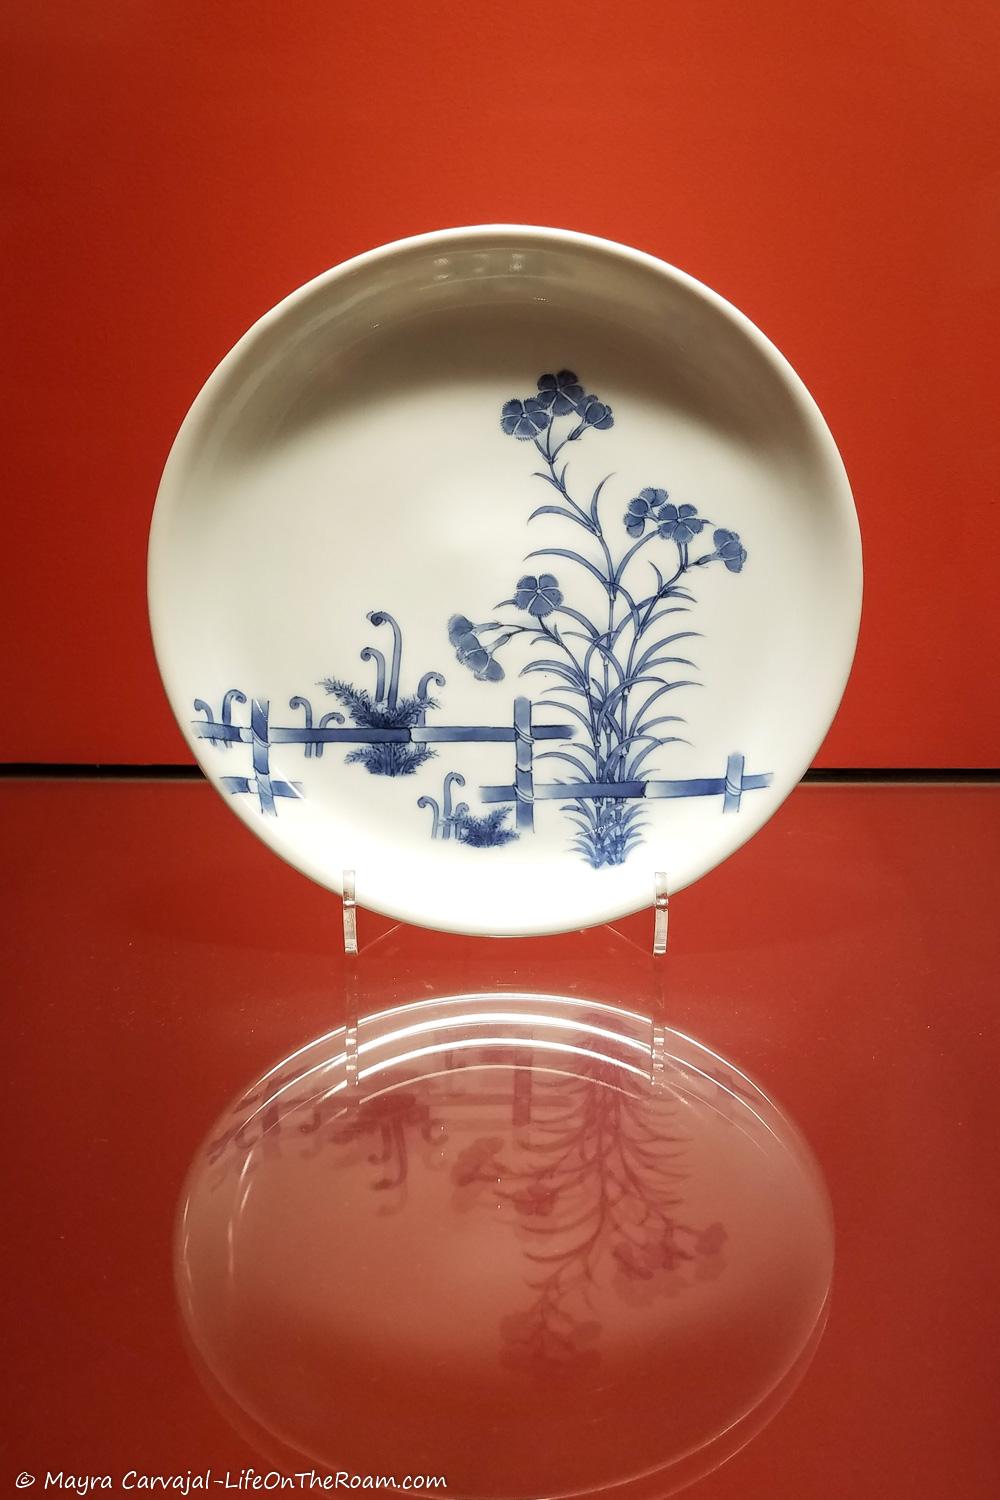 A dish in white porcelain with delicate drawings in blue